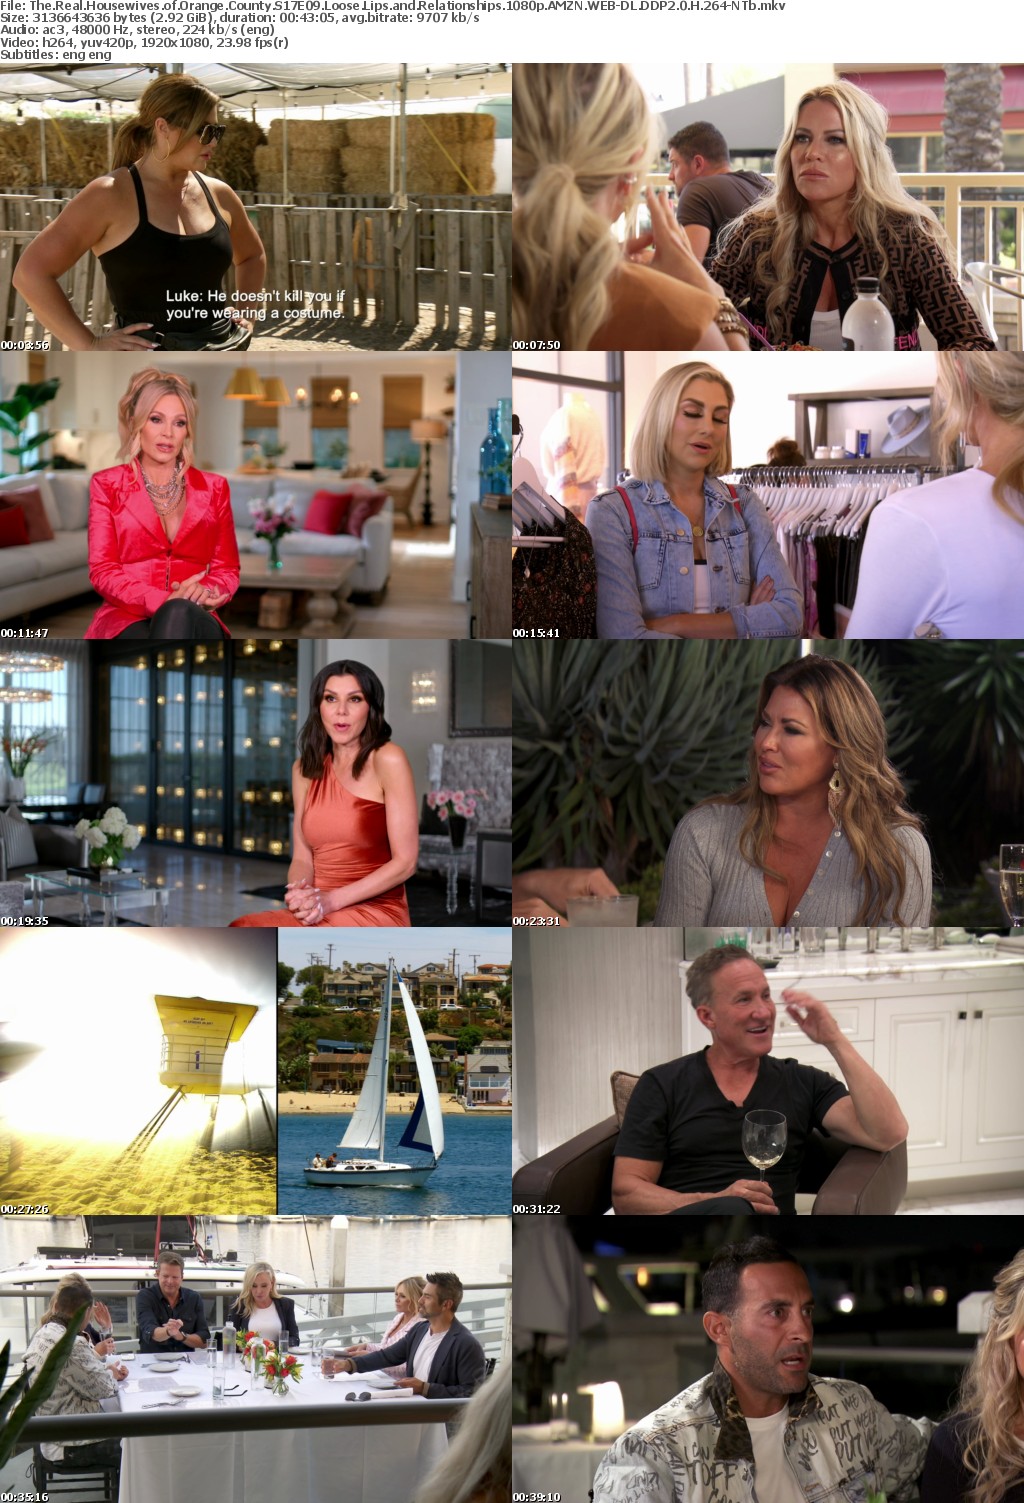 The Real Housewives of Orange County S17E09 Loose Lips and Relationships 1080p AMZN WEB-DL DDP2 0 H 264-NTb